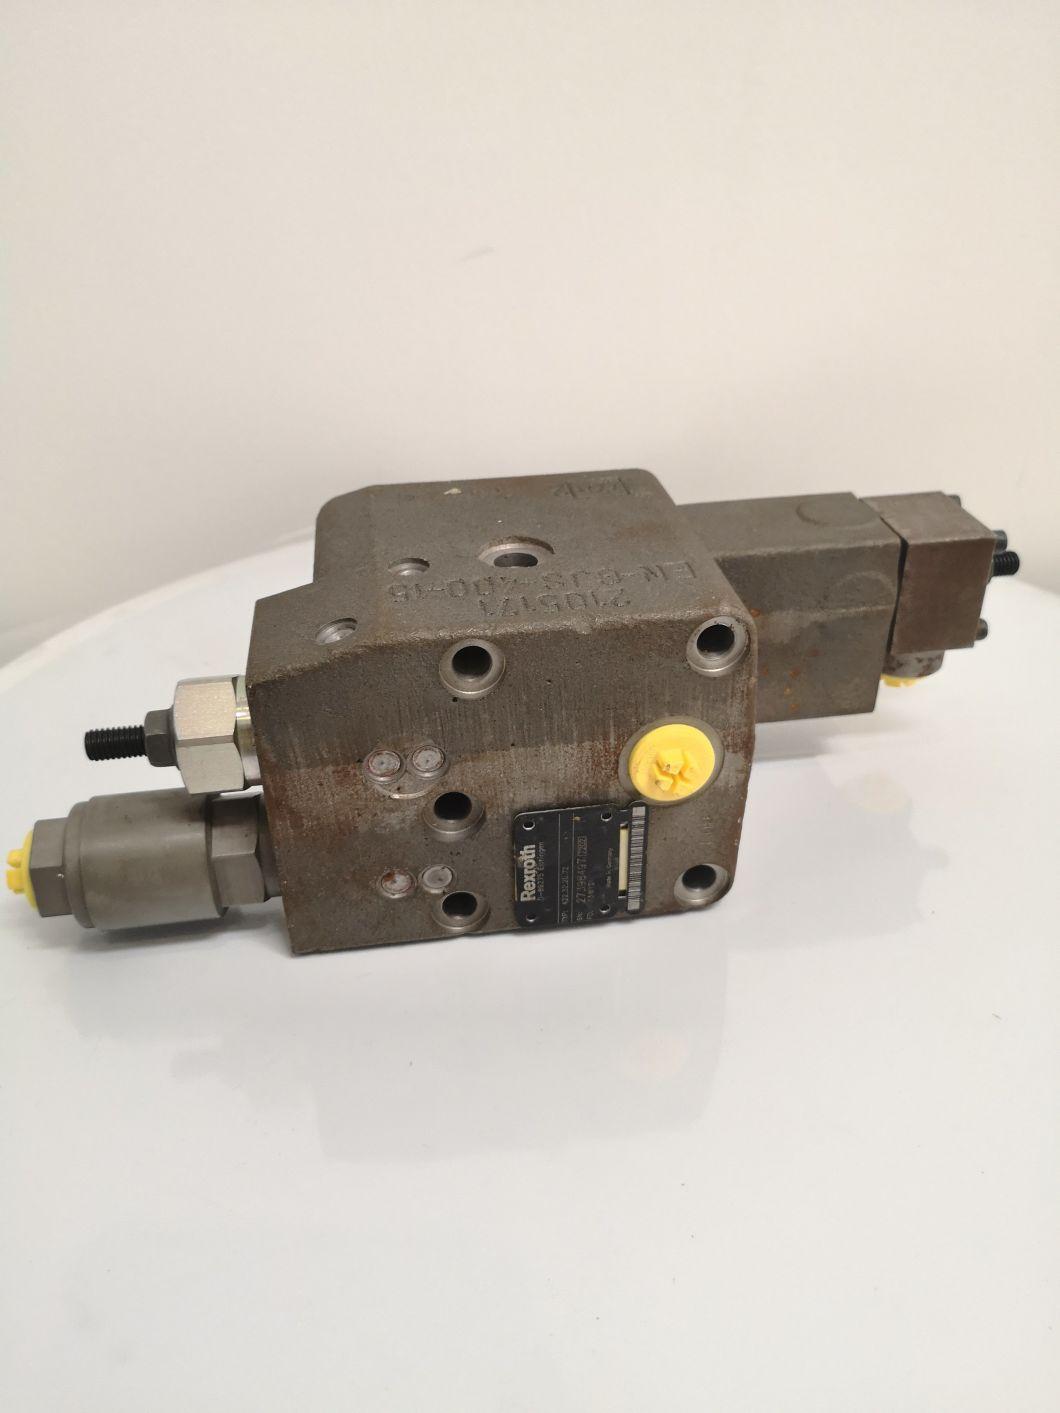 A11vlo260 LG1eh2 Valve for Rexroth Hydraulic Piston Pump Parts